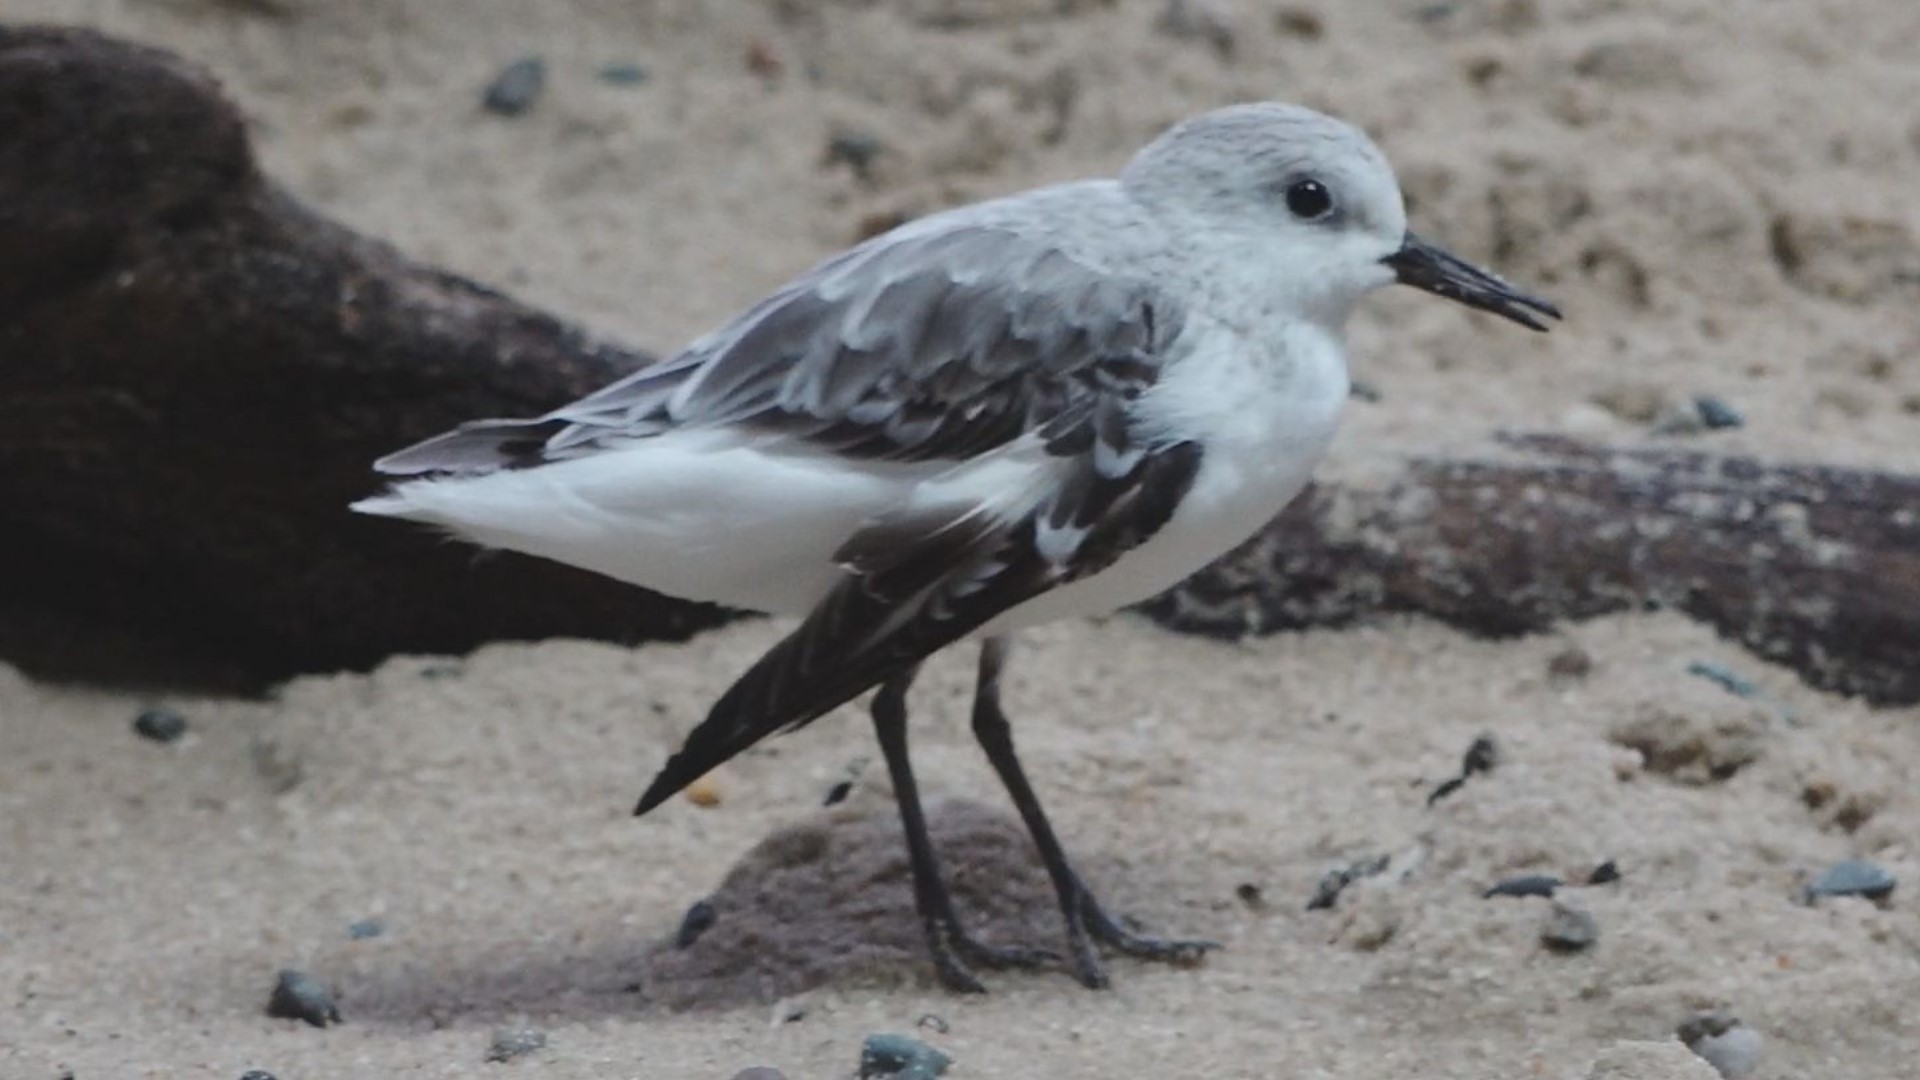 The sanderling named "Peepsqueak," who was rescued from York Beach with a broken wing found her forever home at the New England Aquarium in Boston.